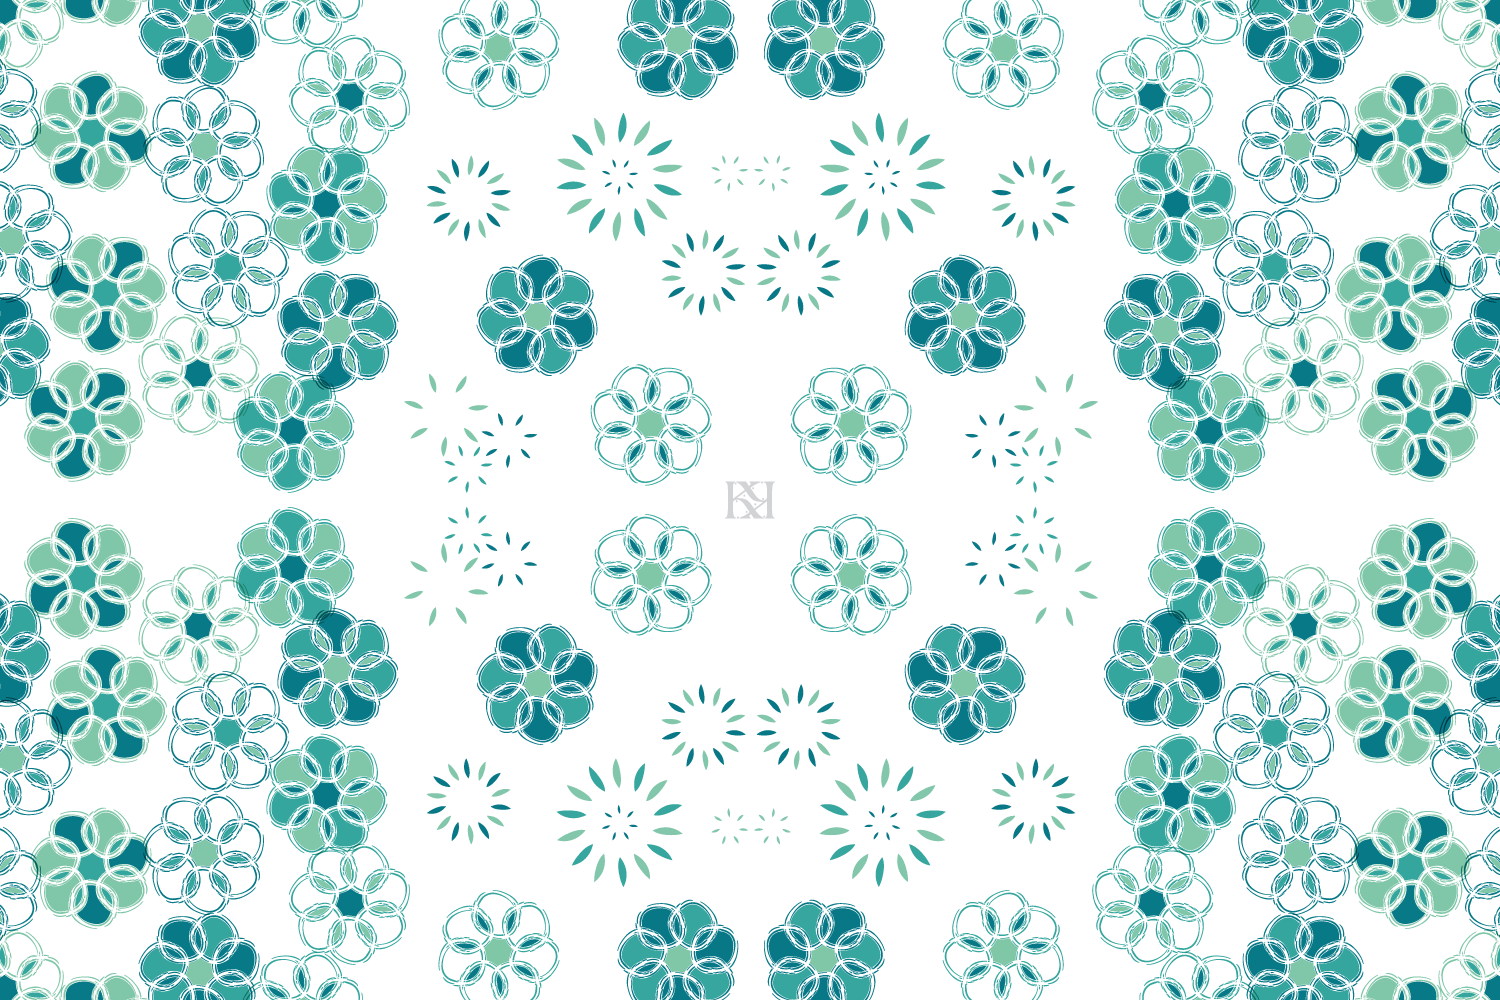 Green_Teal_Flowers_Ornate_1500px_x_1000px-01.png